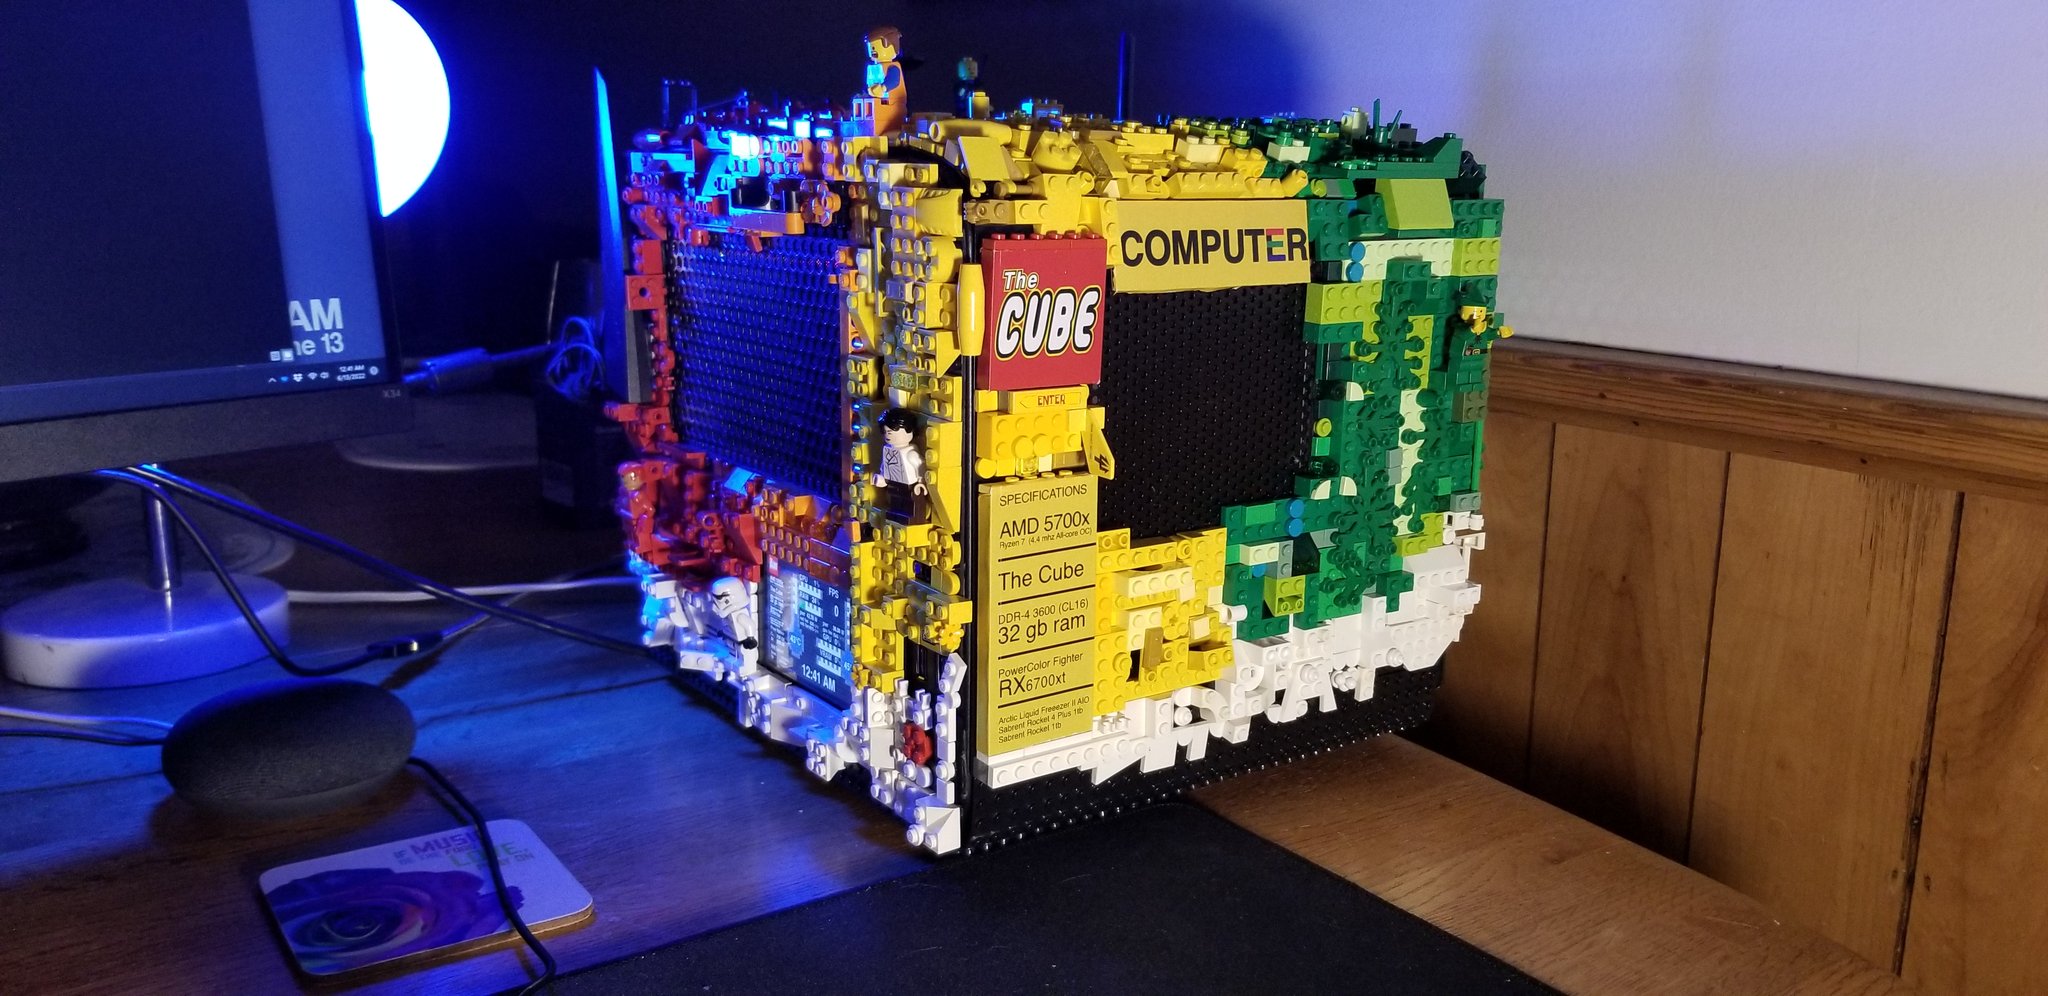 The Cube: Tinkerers wrap PC cases with colorful Lego bricks